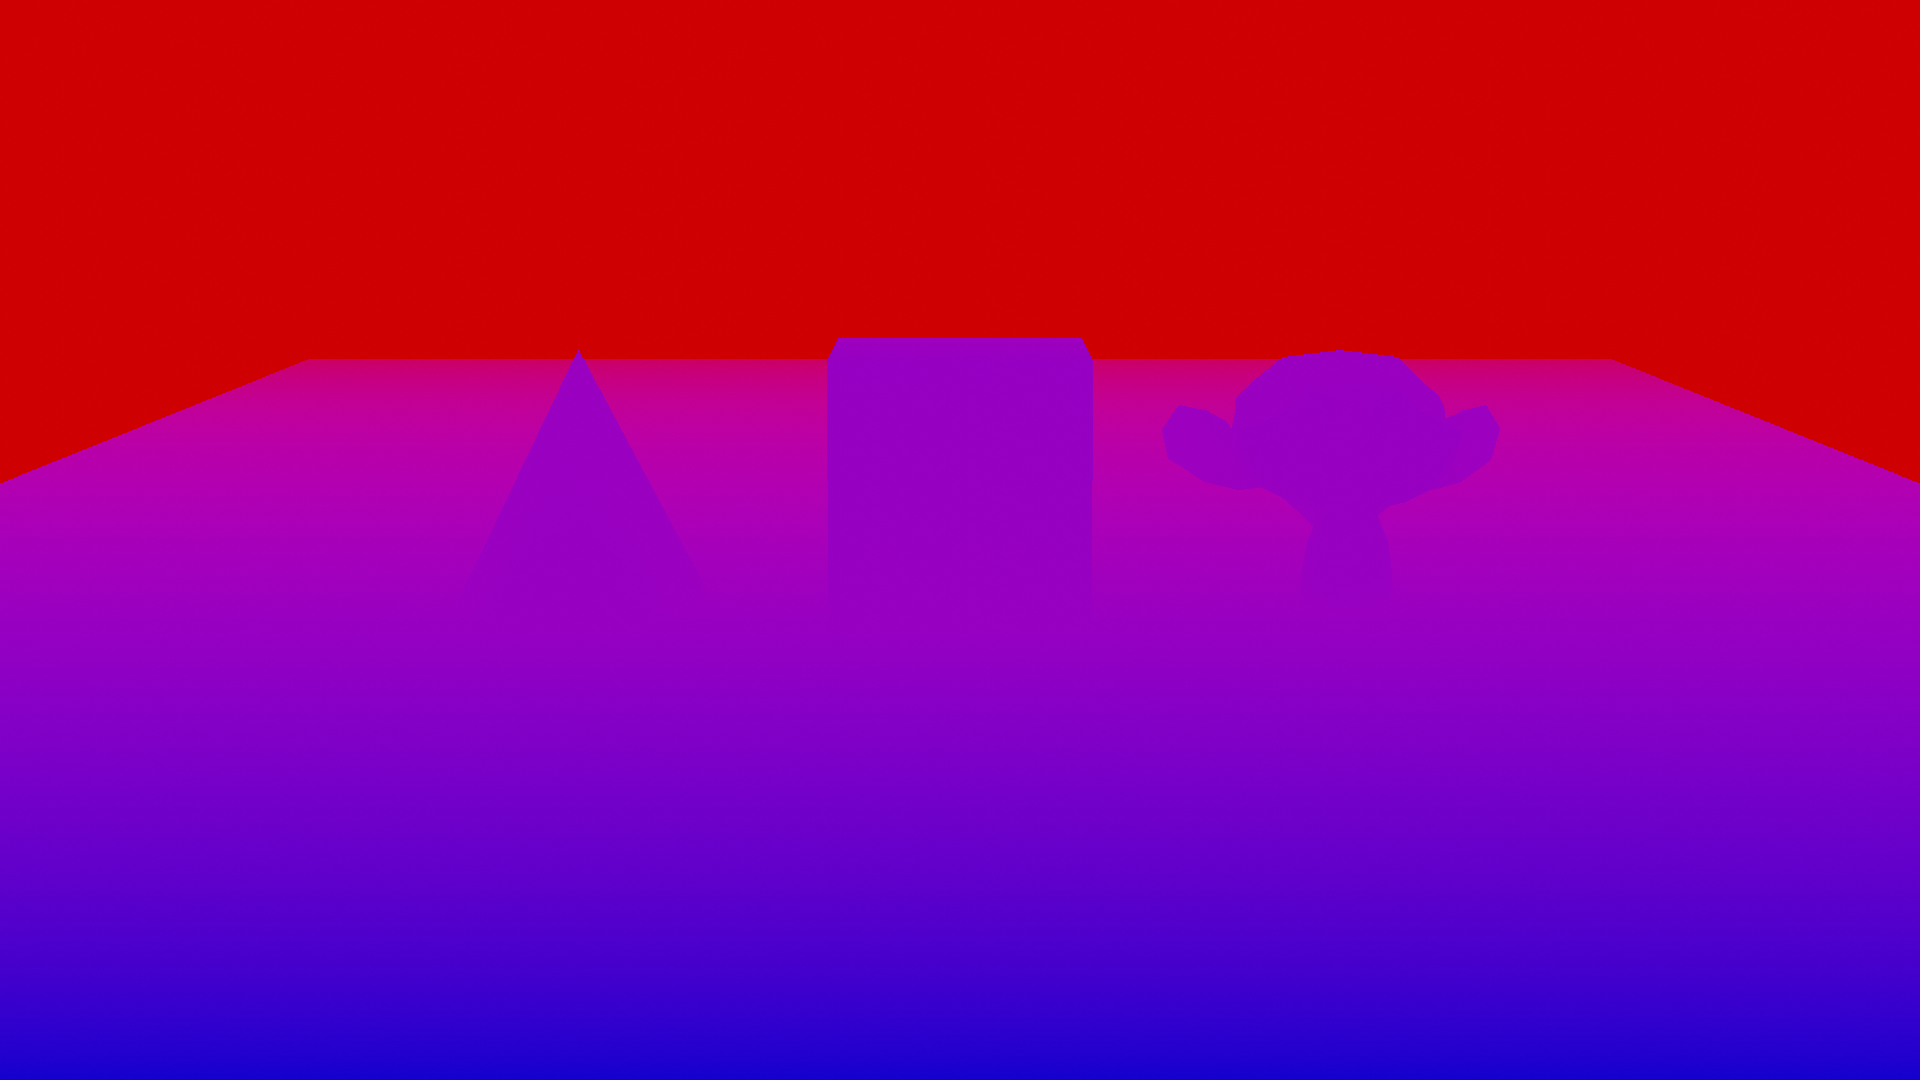 Normal image with depth (blue = near, red = far away)